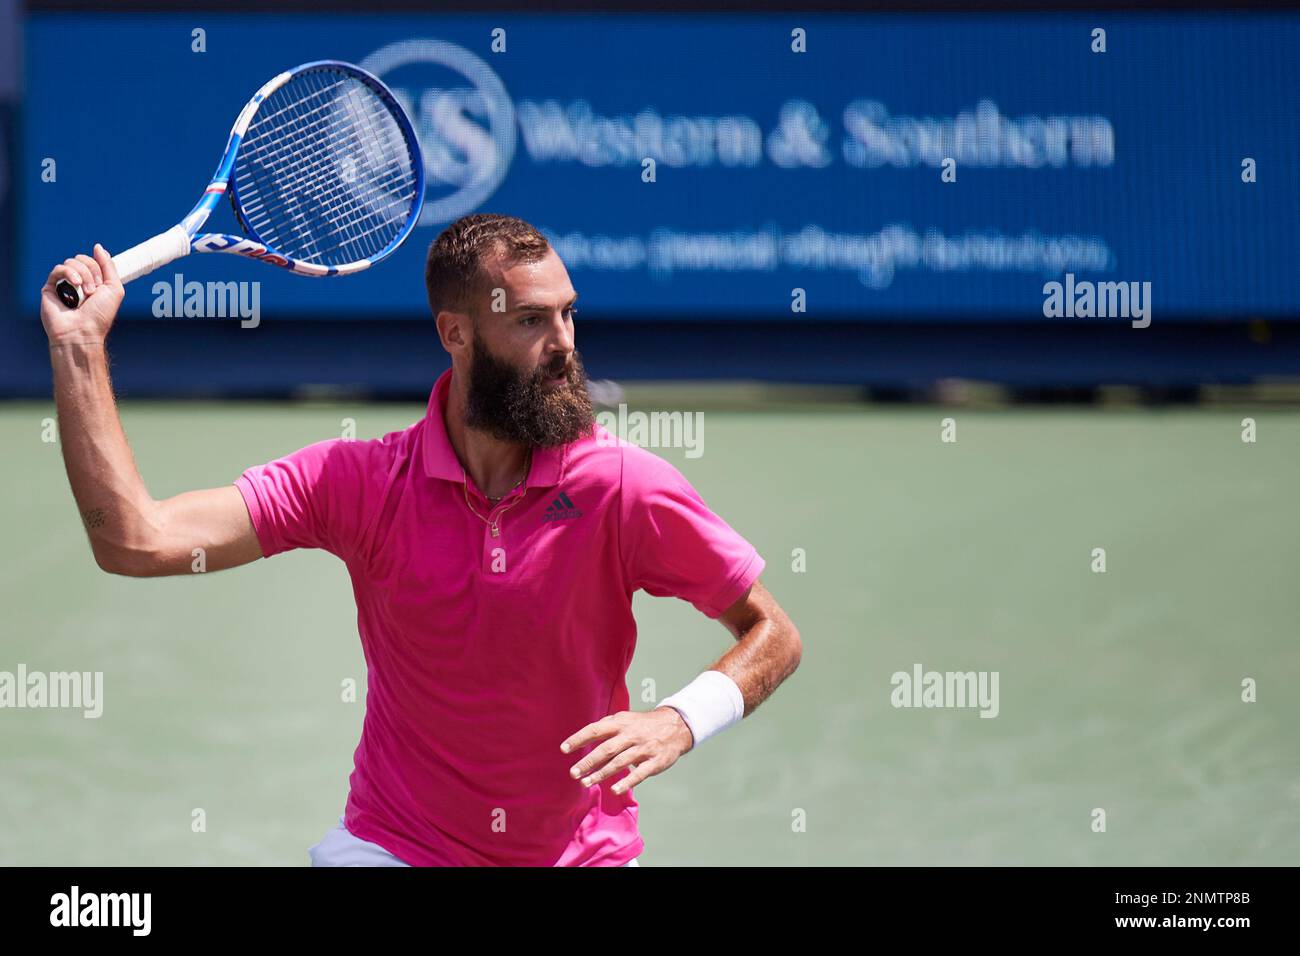 CINCINNATI, OH - AUGUST 20: Benoit Paire of France lines up a slice  forehand during the quarter final match on day 5 of the Western & Southern  Open at the Lindner Family